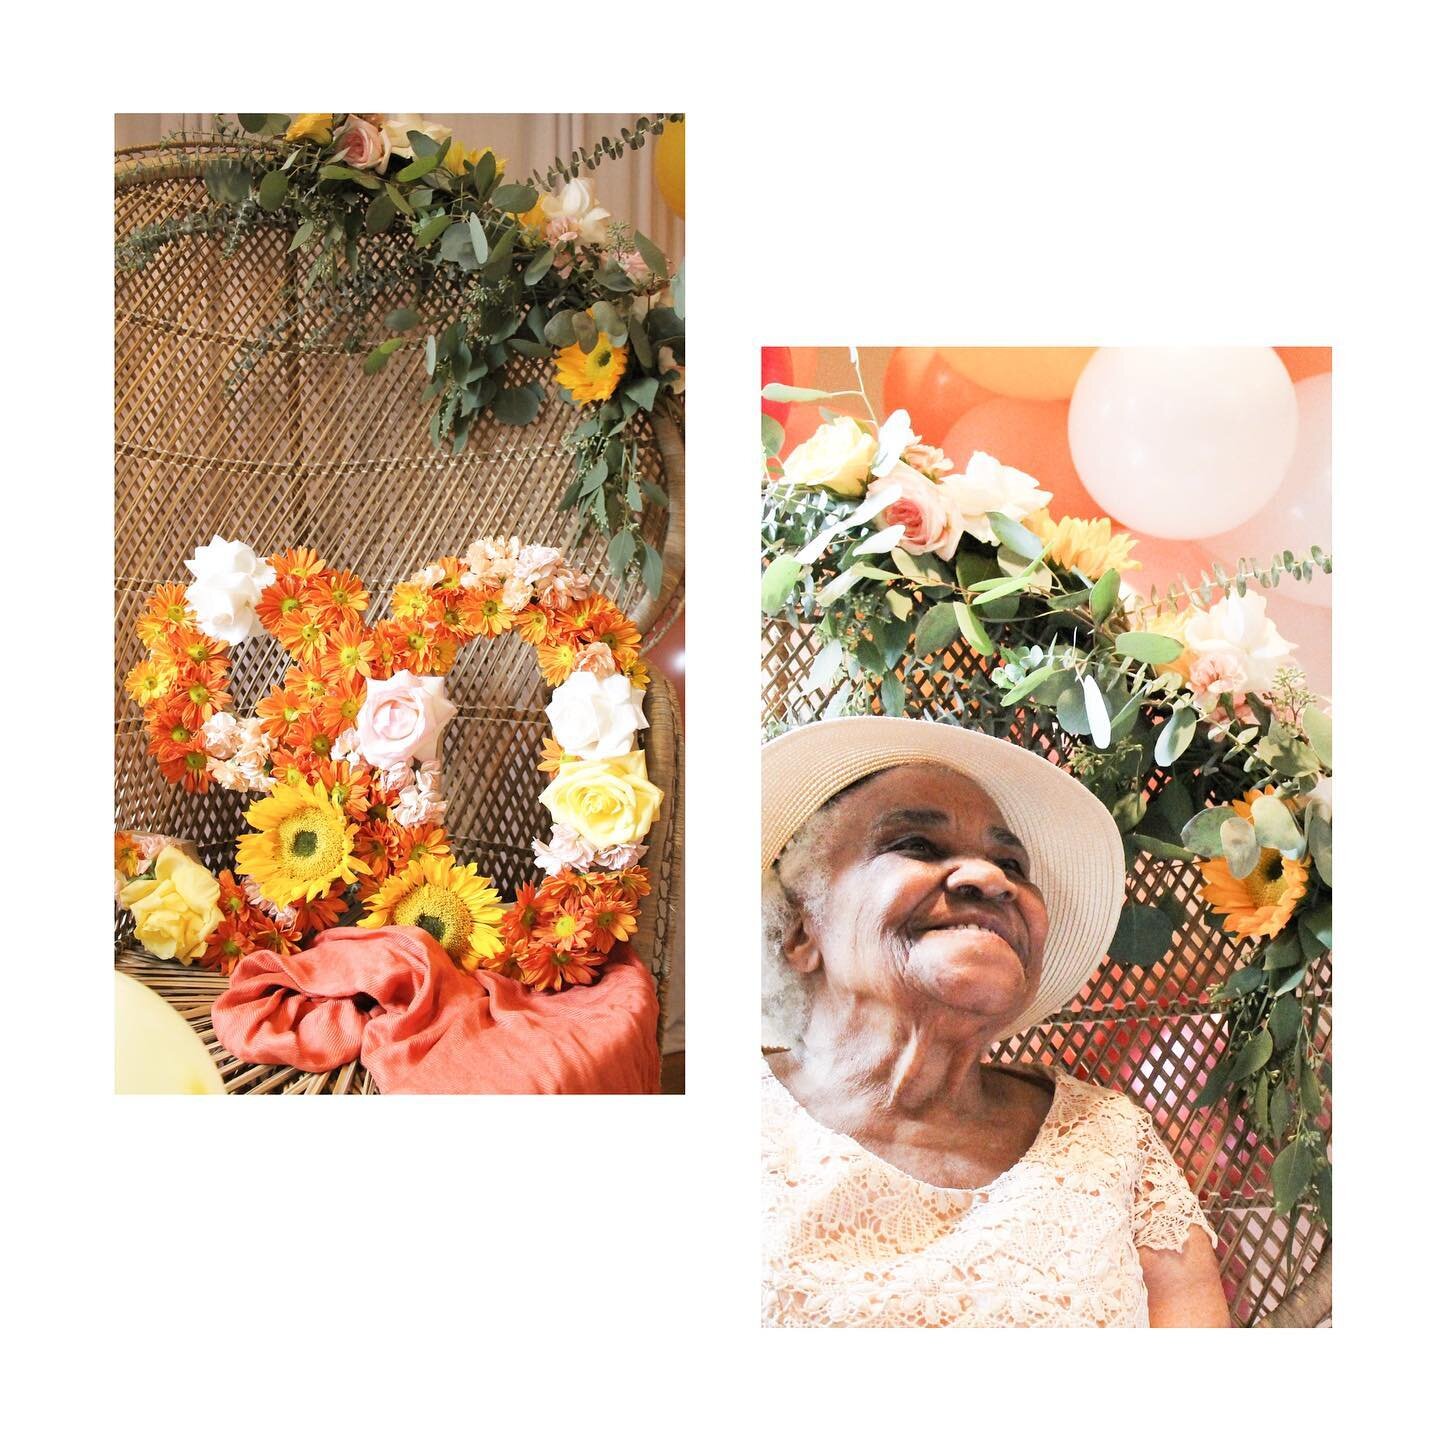 Preview of tomorrow&rsquo;s blog post 🌻

A special 90th birthday and the amazing woman who celebrated it ✨

flowers &amp; photography @jaqiesevents 
&bull;
&bull;
&bull;
&bull;
&bull;
#blogger #momblogger #eventblog #birthday #90yearsold #90thbirthd